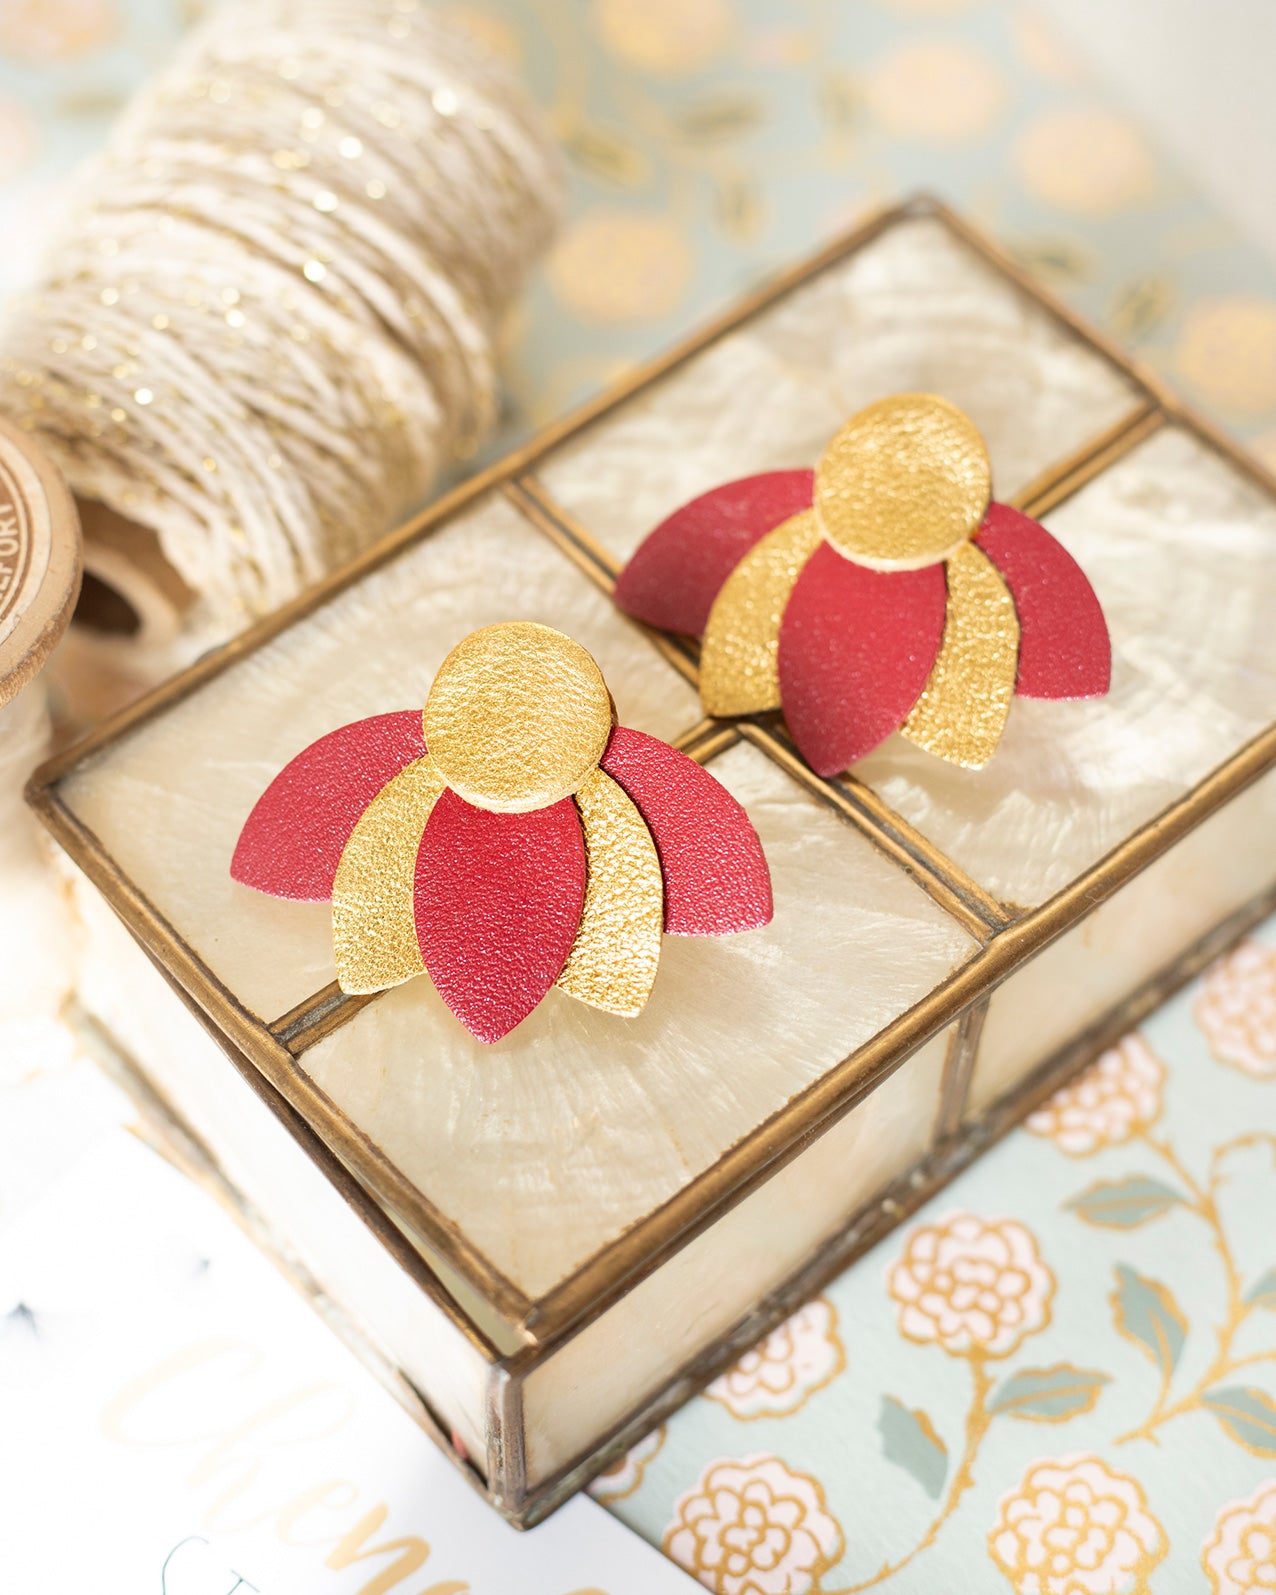 Large Lotus Flower stud earrings - Bordeaux red and gold